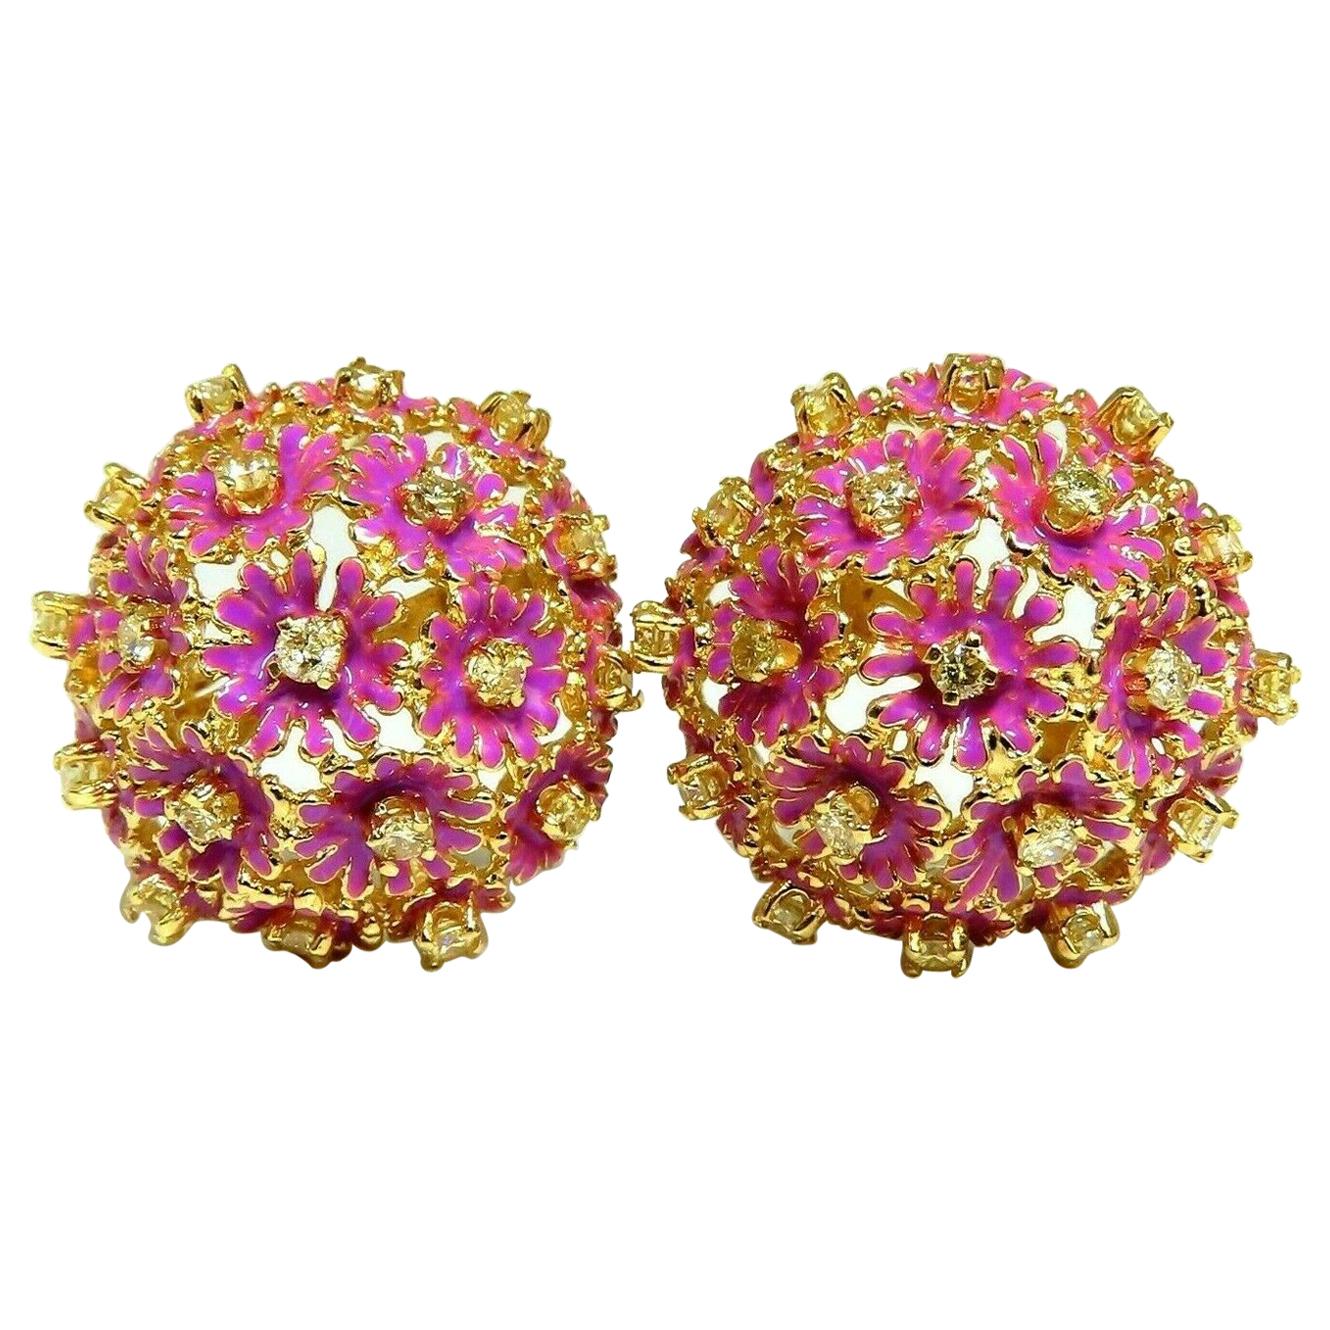 1.52ct Natural Fancy Yellow Diamonds Floral Dome Cluster Clip Earrings 14 Karat